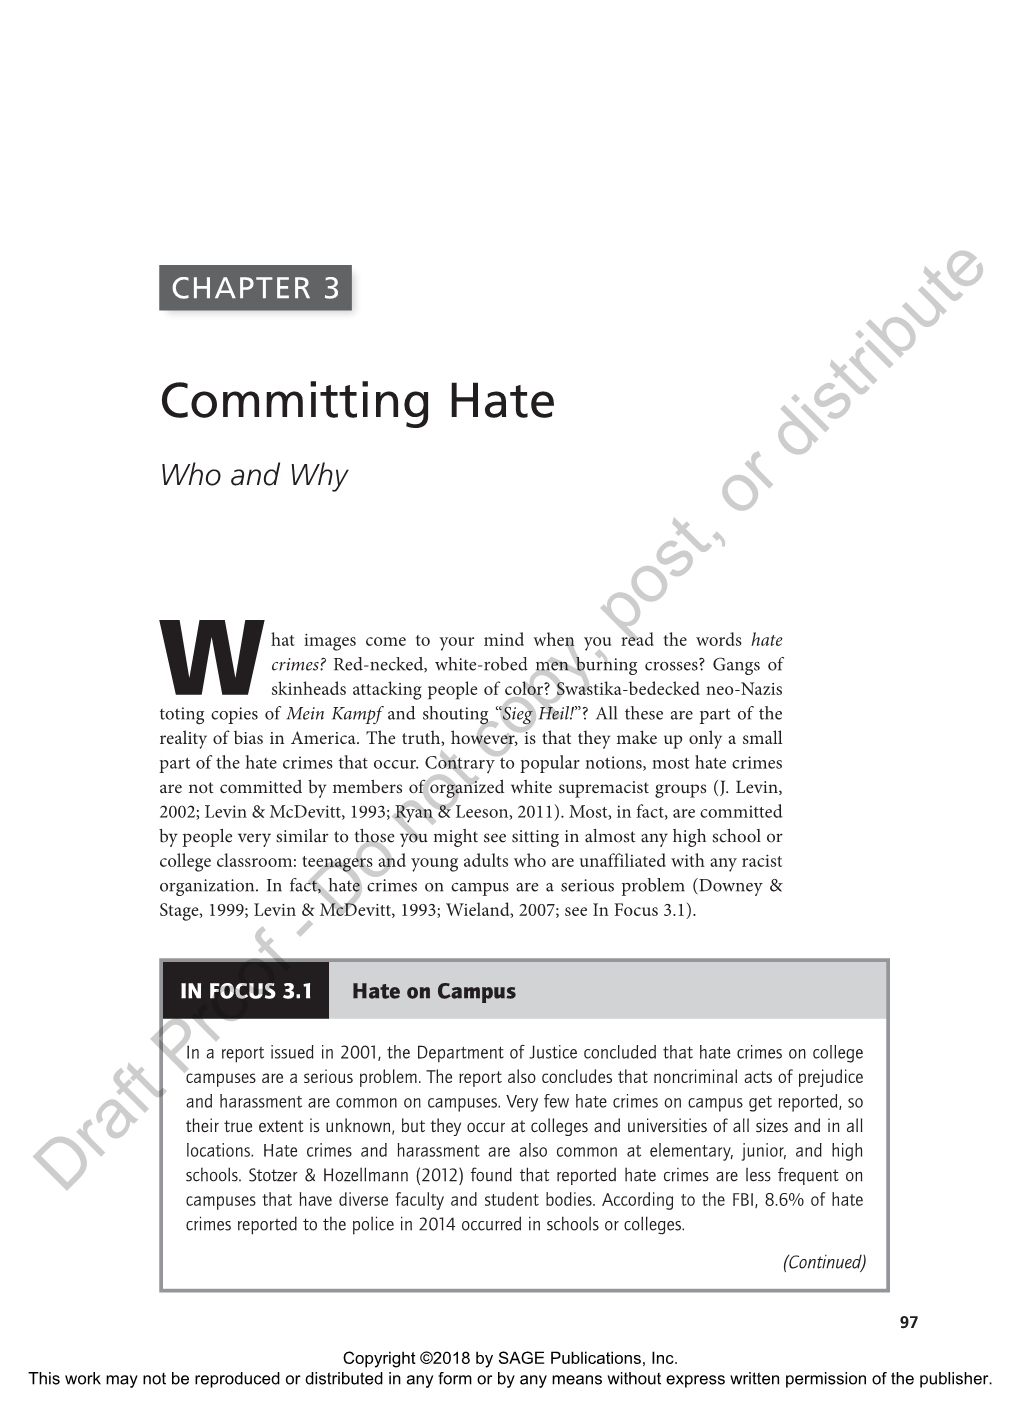 Committing Hate